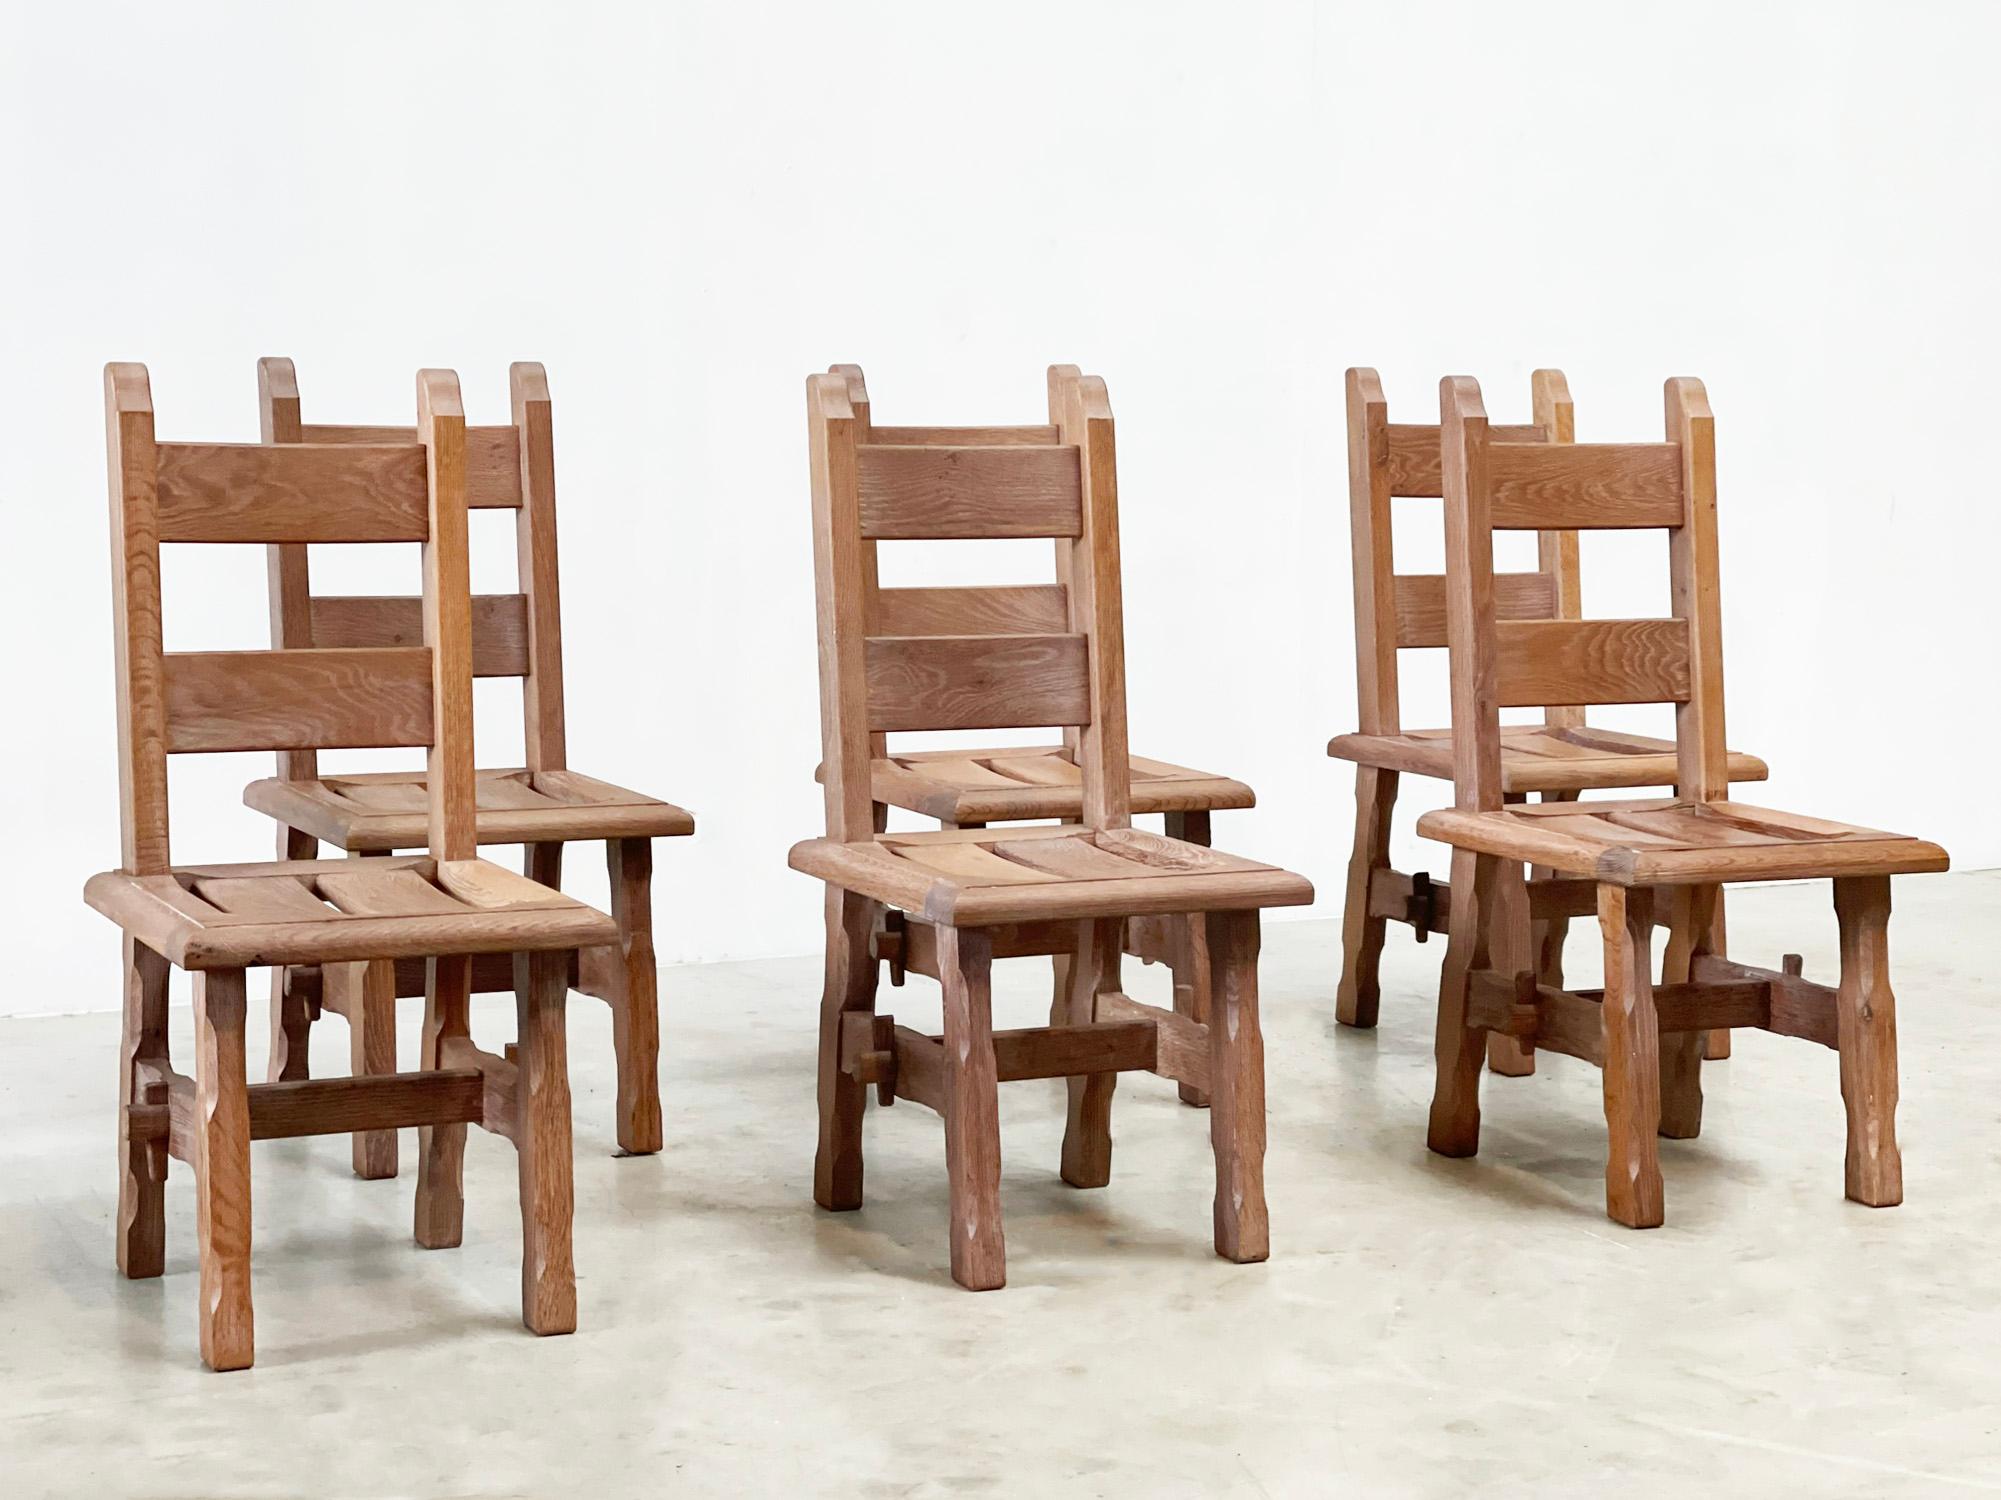 Brutalist dining chairs. these dining chairs were made in belgium in the 80s. They have the typical brutalist shape from those years. These chairs are very reminiscent of the chairs of